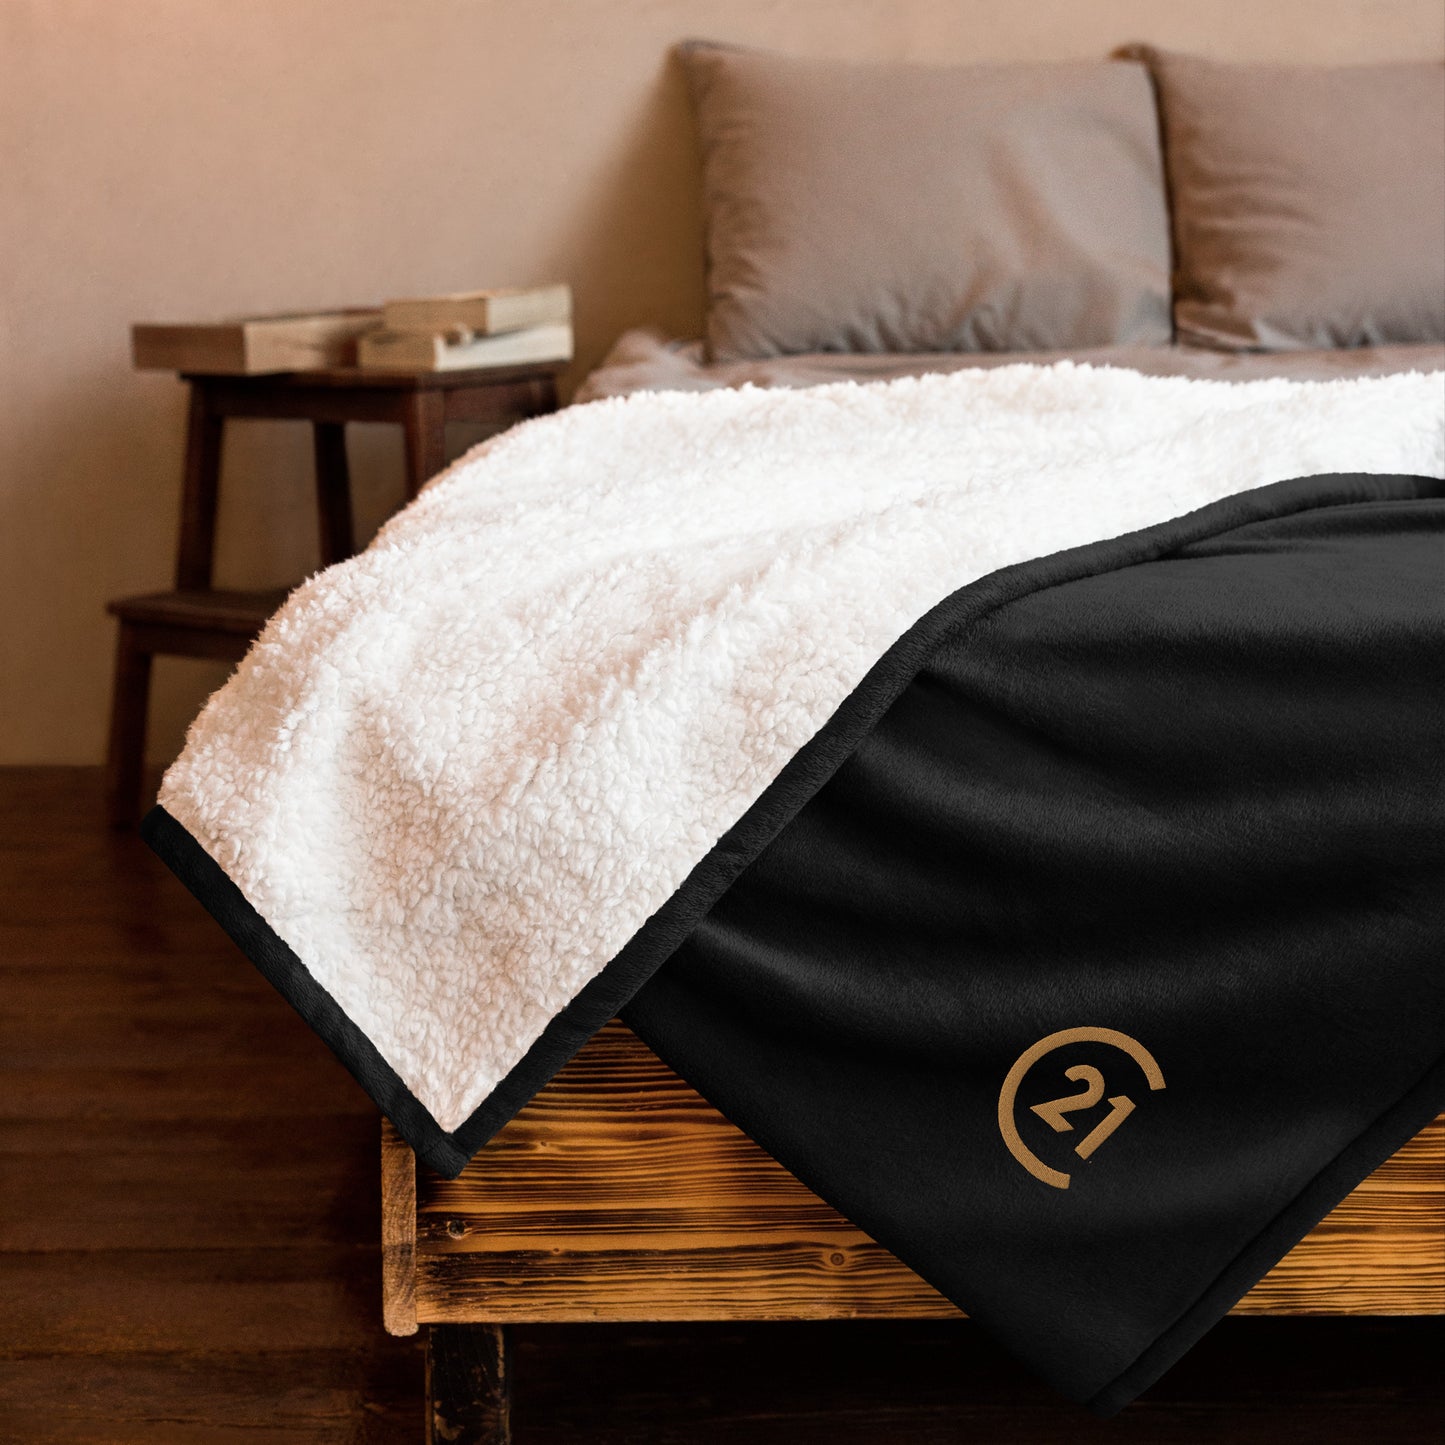 Century 21 Embroidered Premium sherpa blanket (from $$91 per complete box)